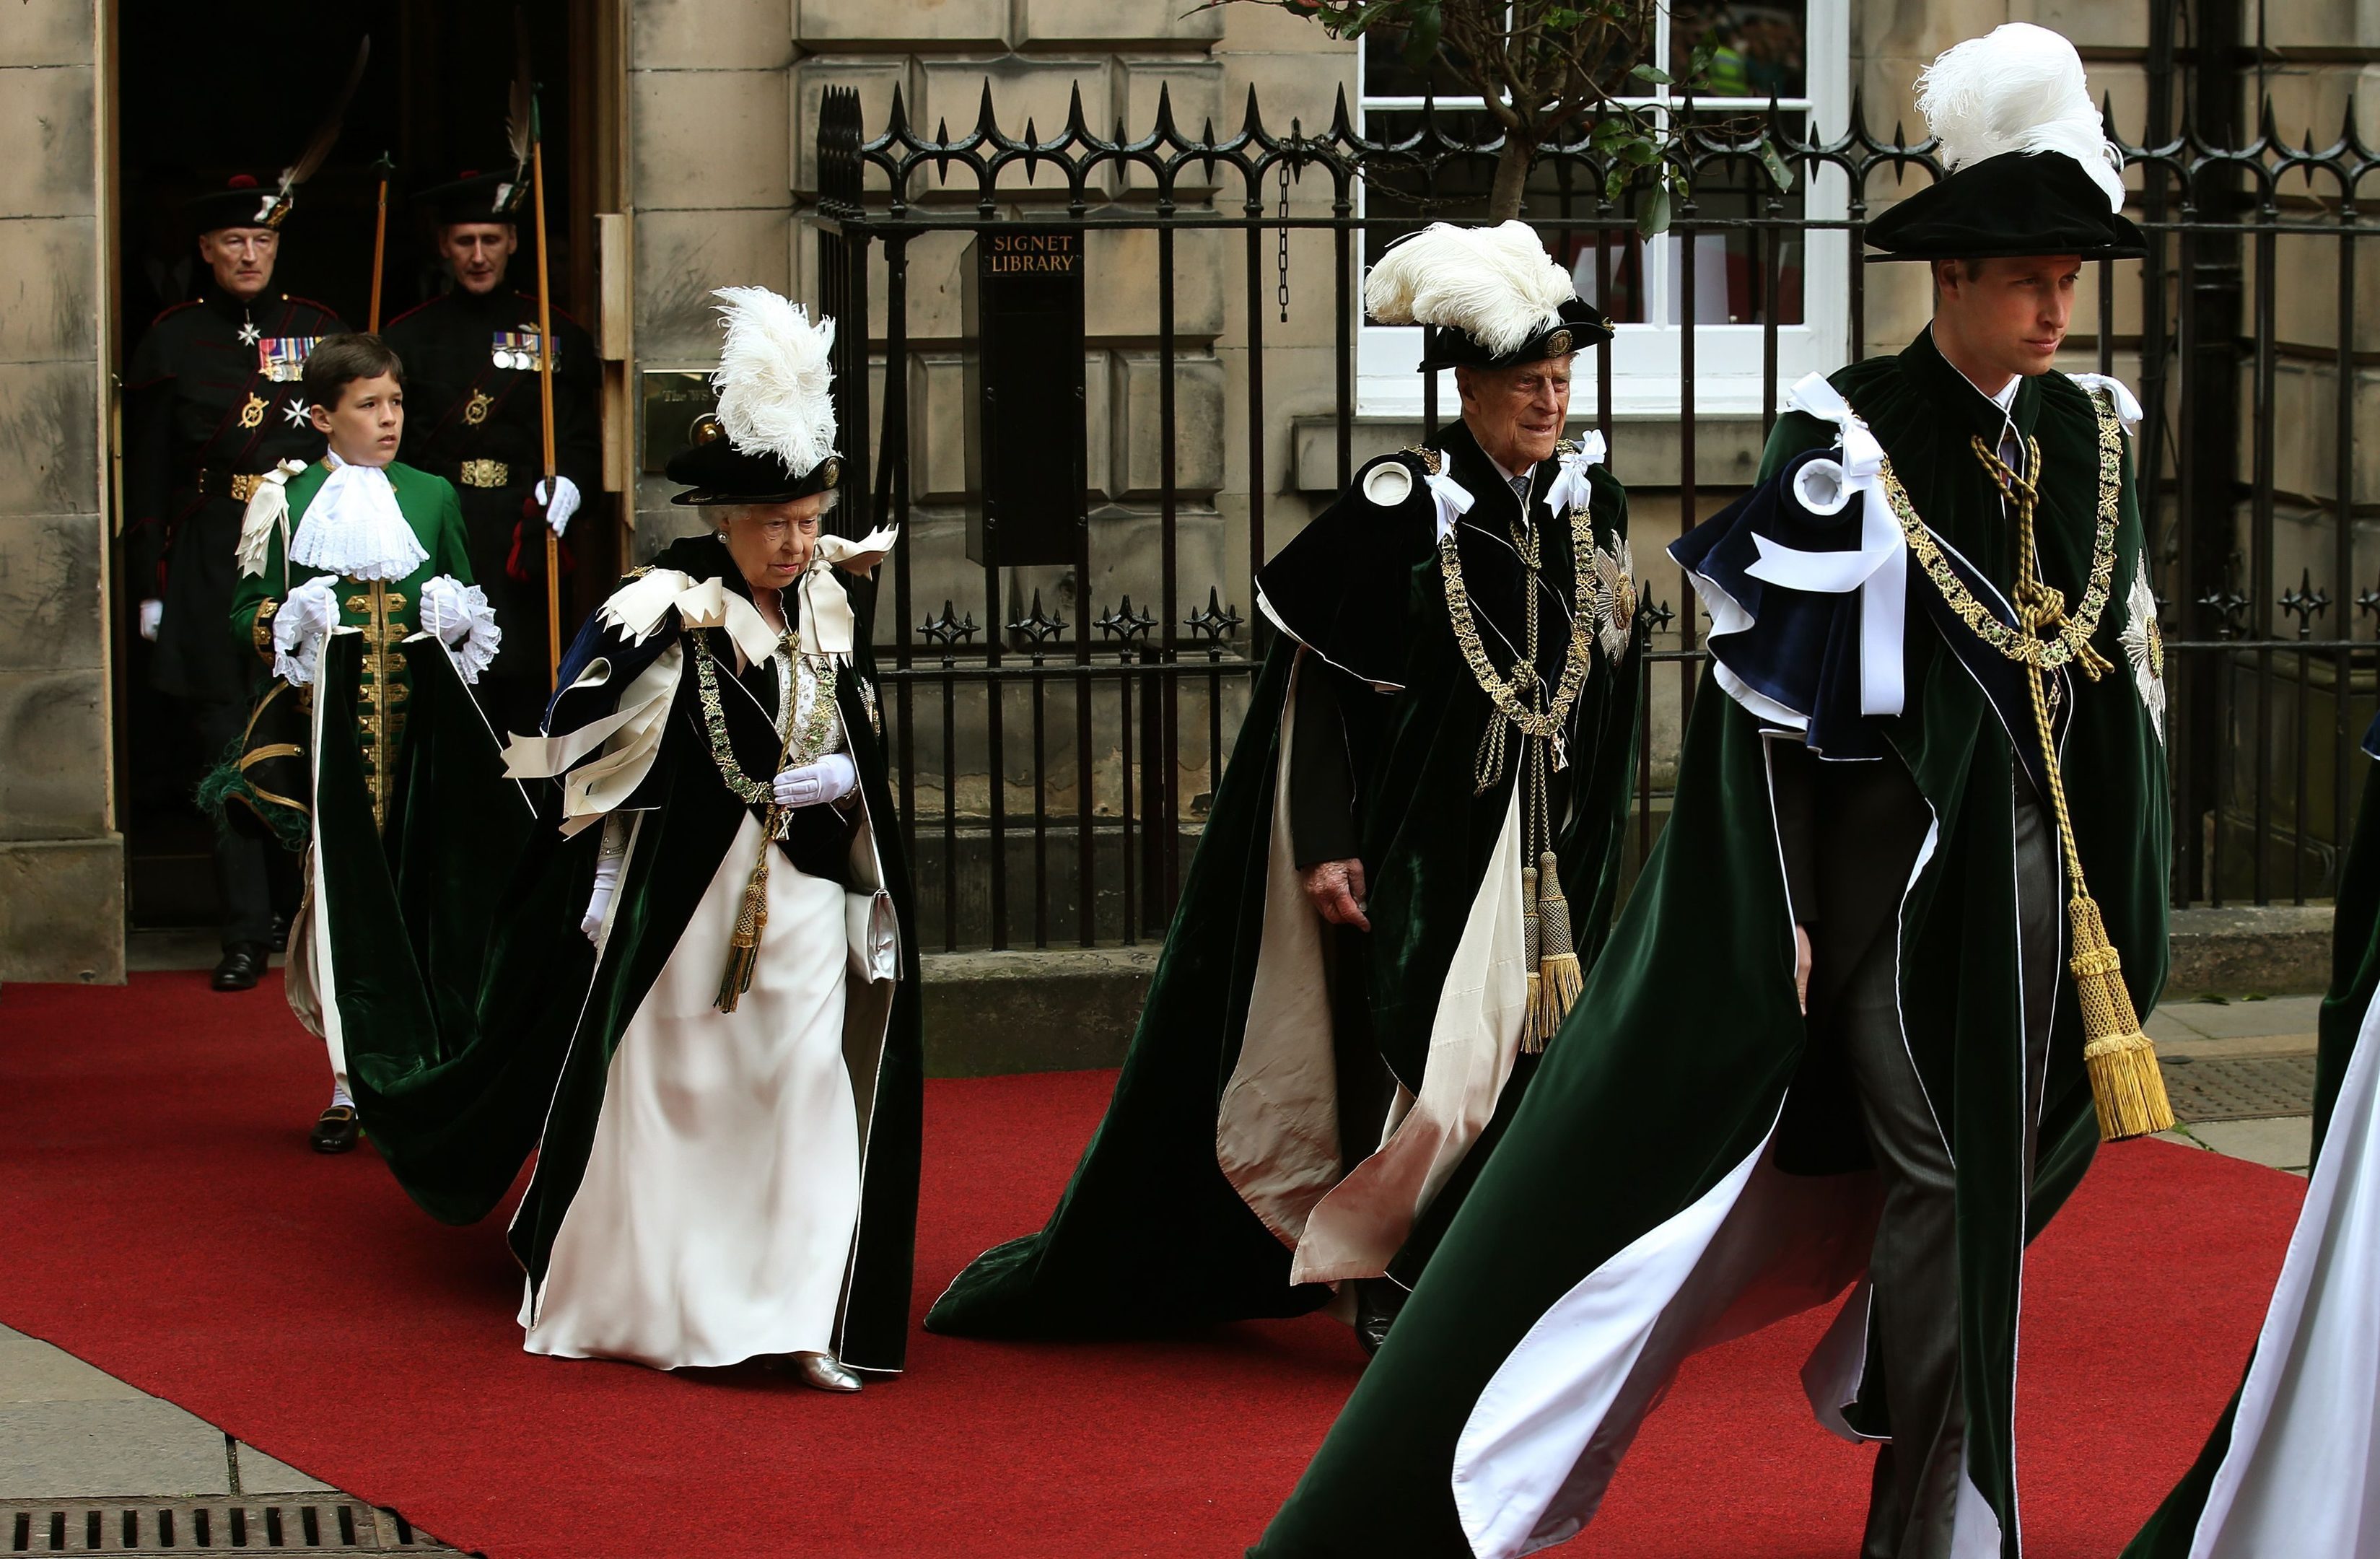 The Queen,  the Duke of Edinburgh and  Earl of Strathearn in Edinburgh to attend the Order of the Thistle service.